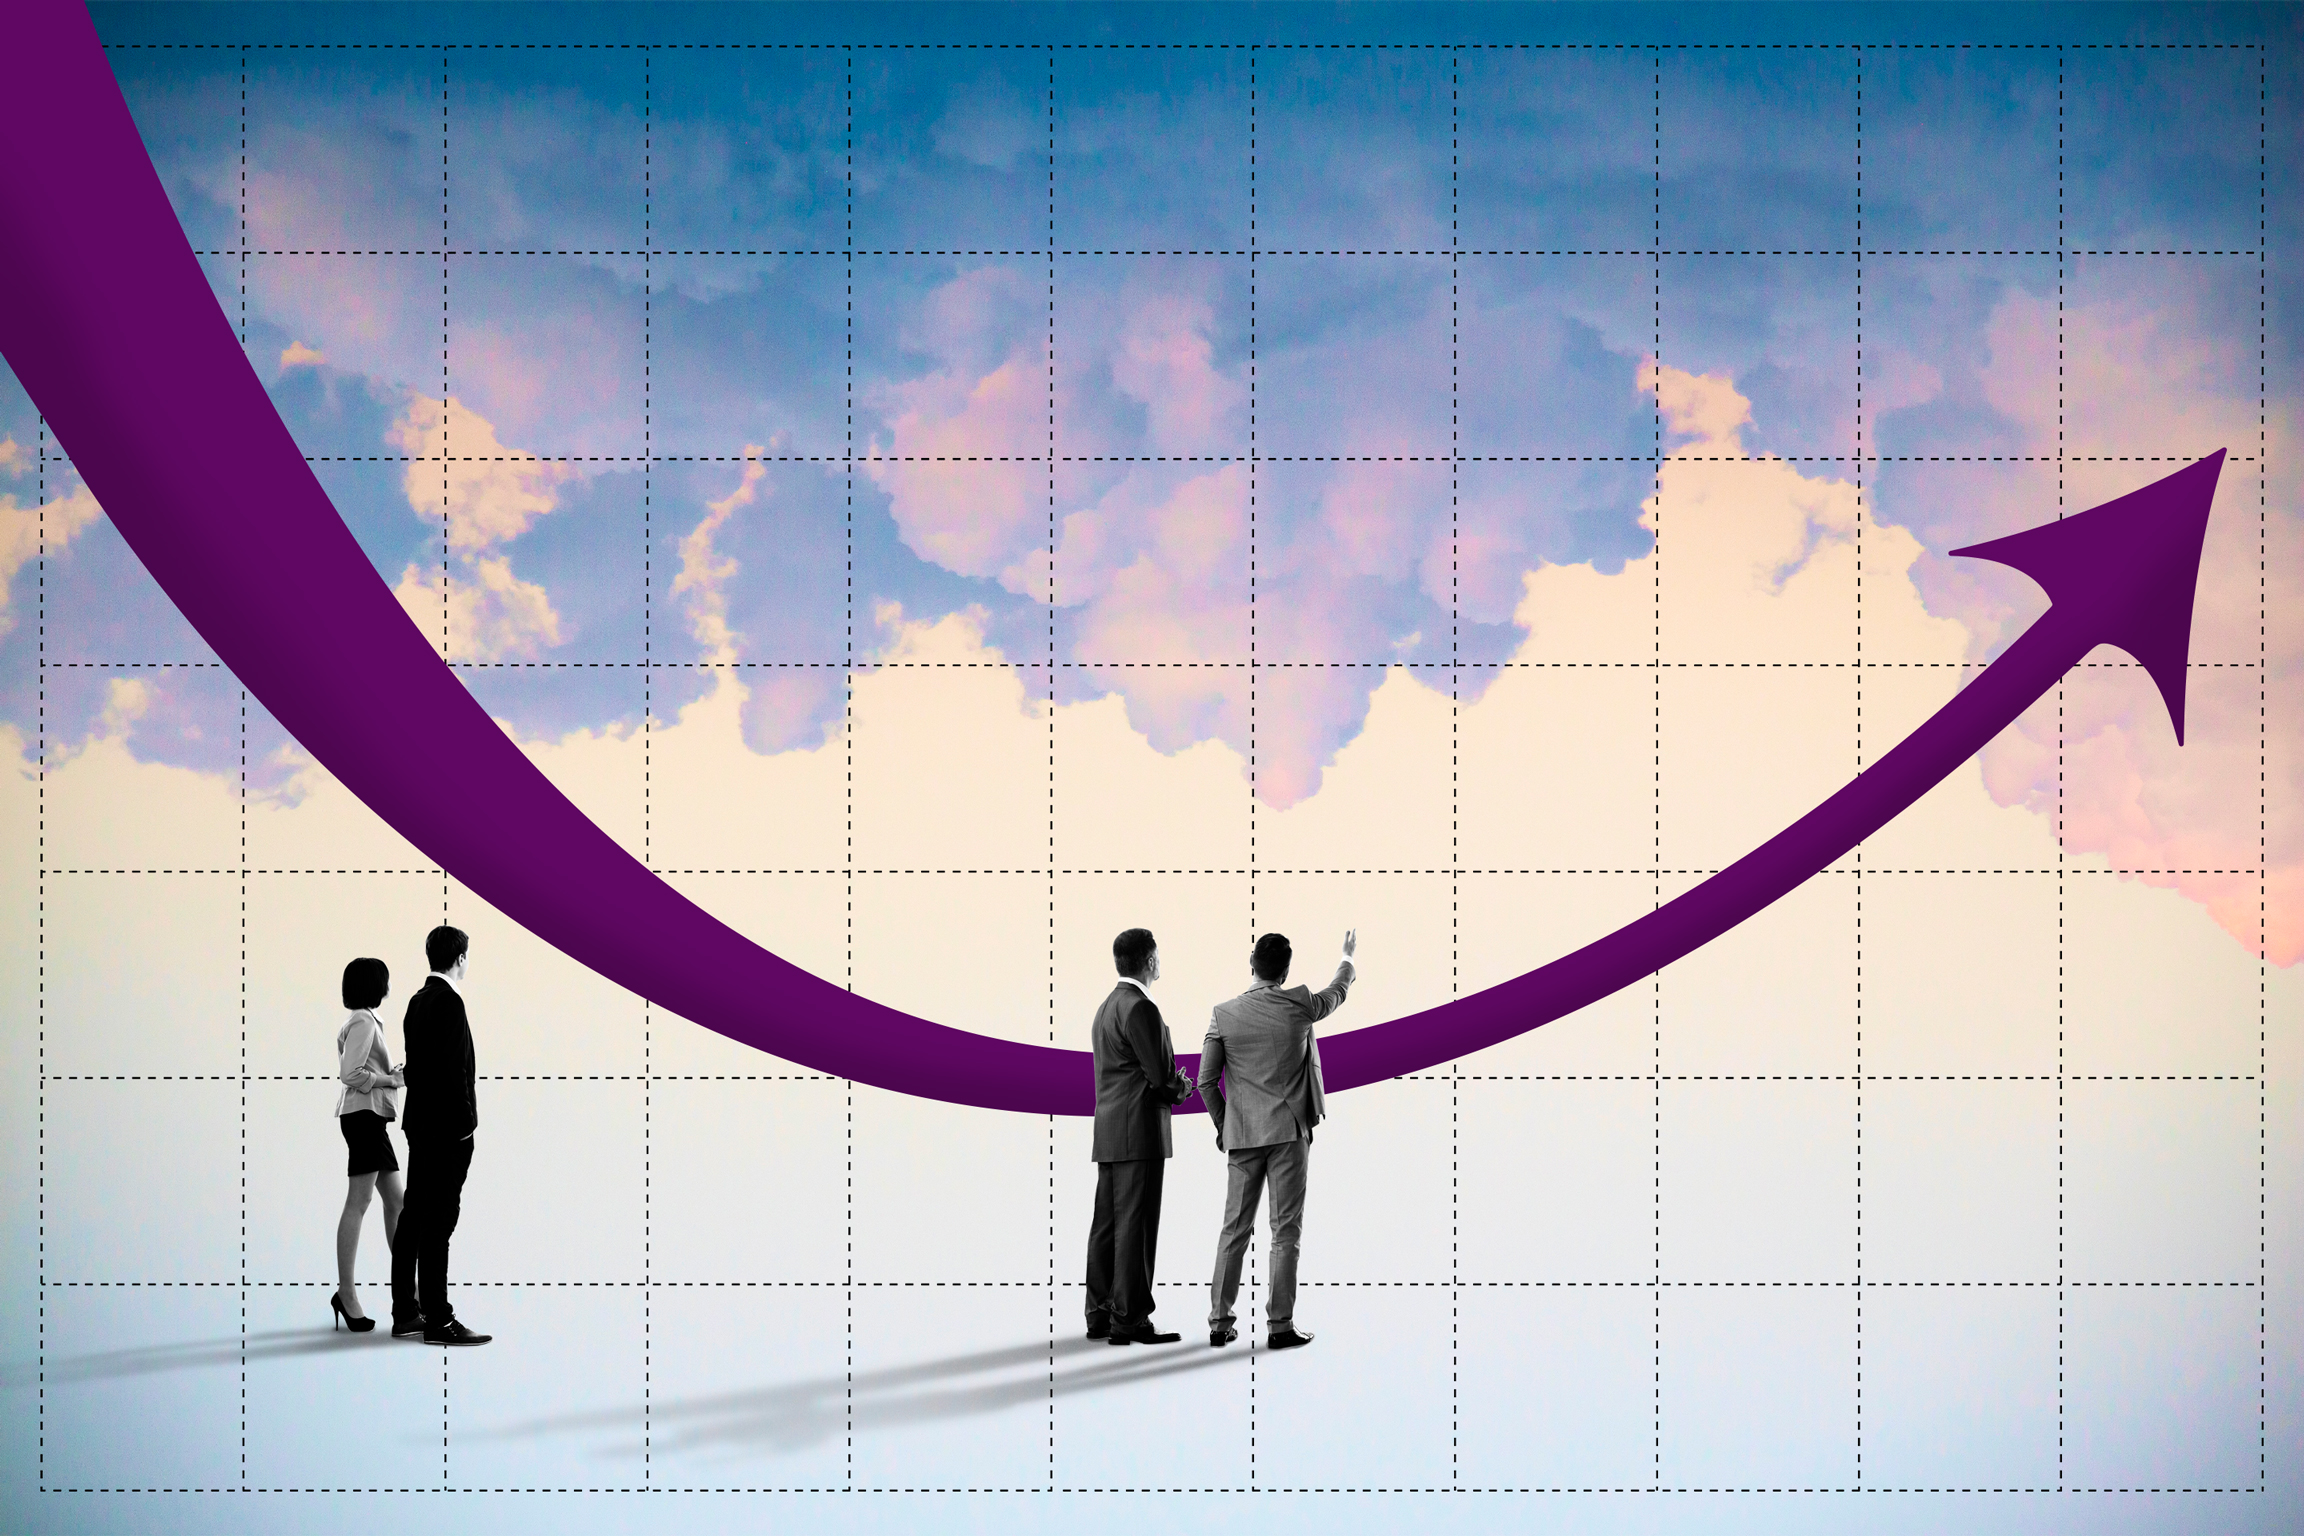 Photo collage of four financial advisors standing in an upside down sky, with an upward flying arrow